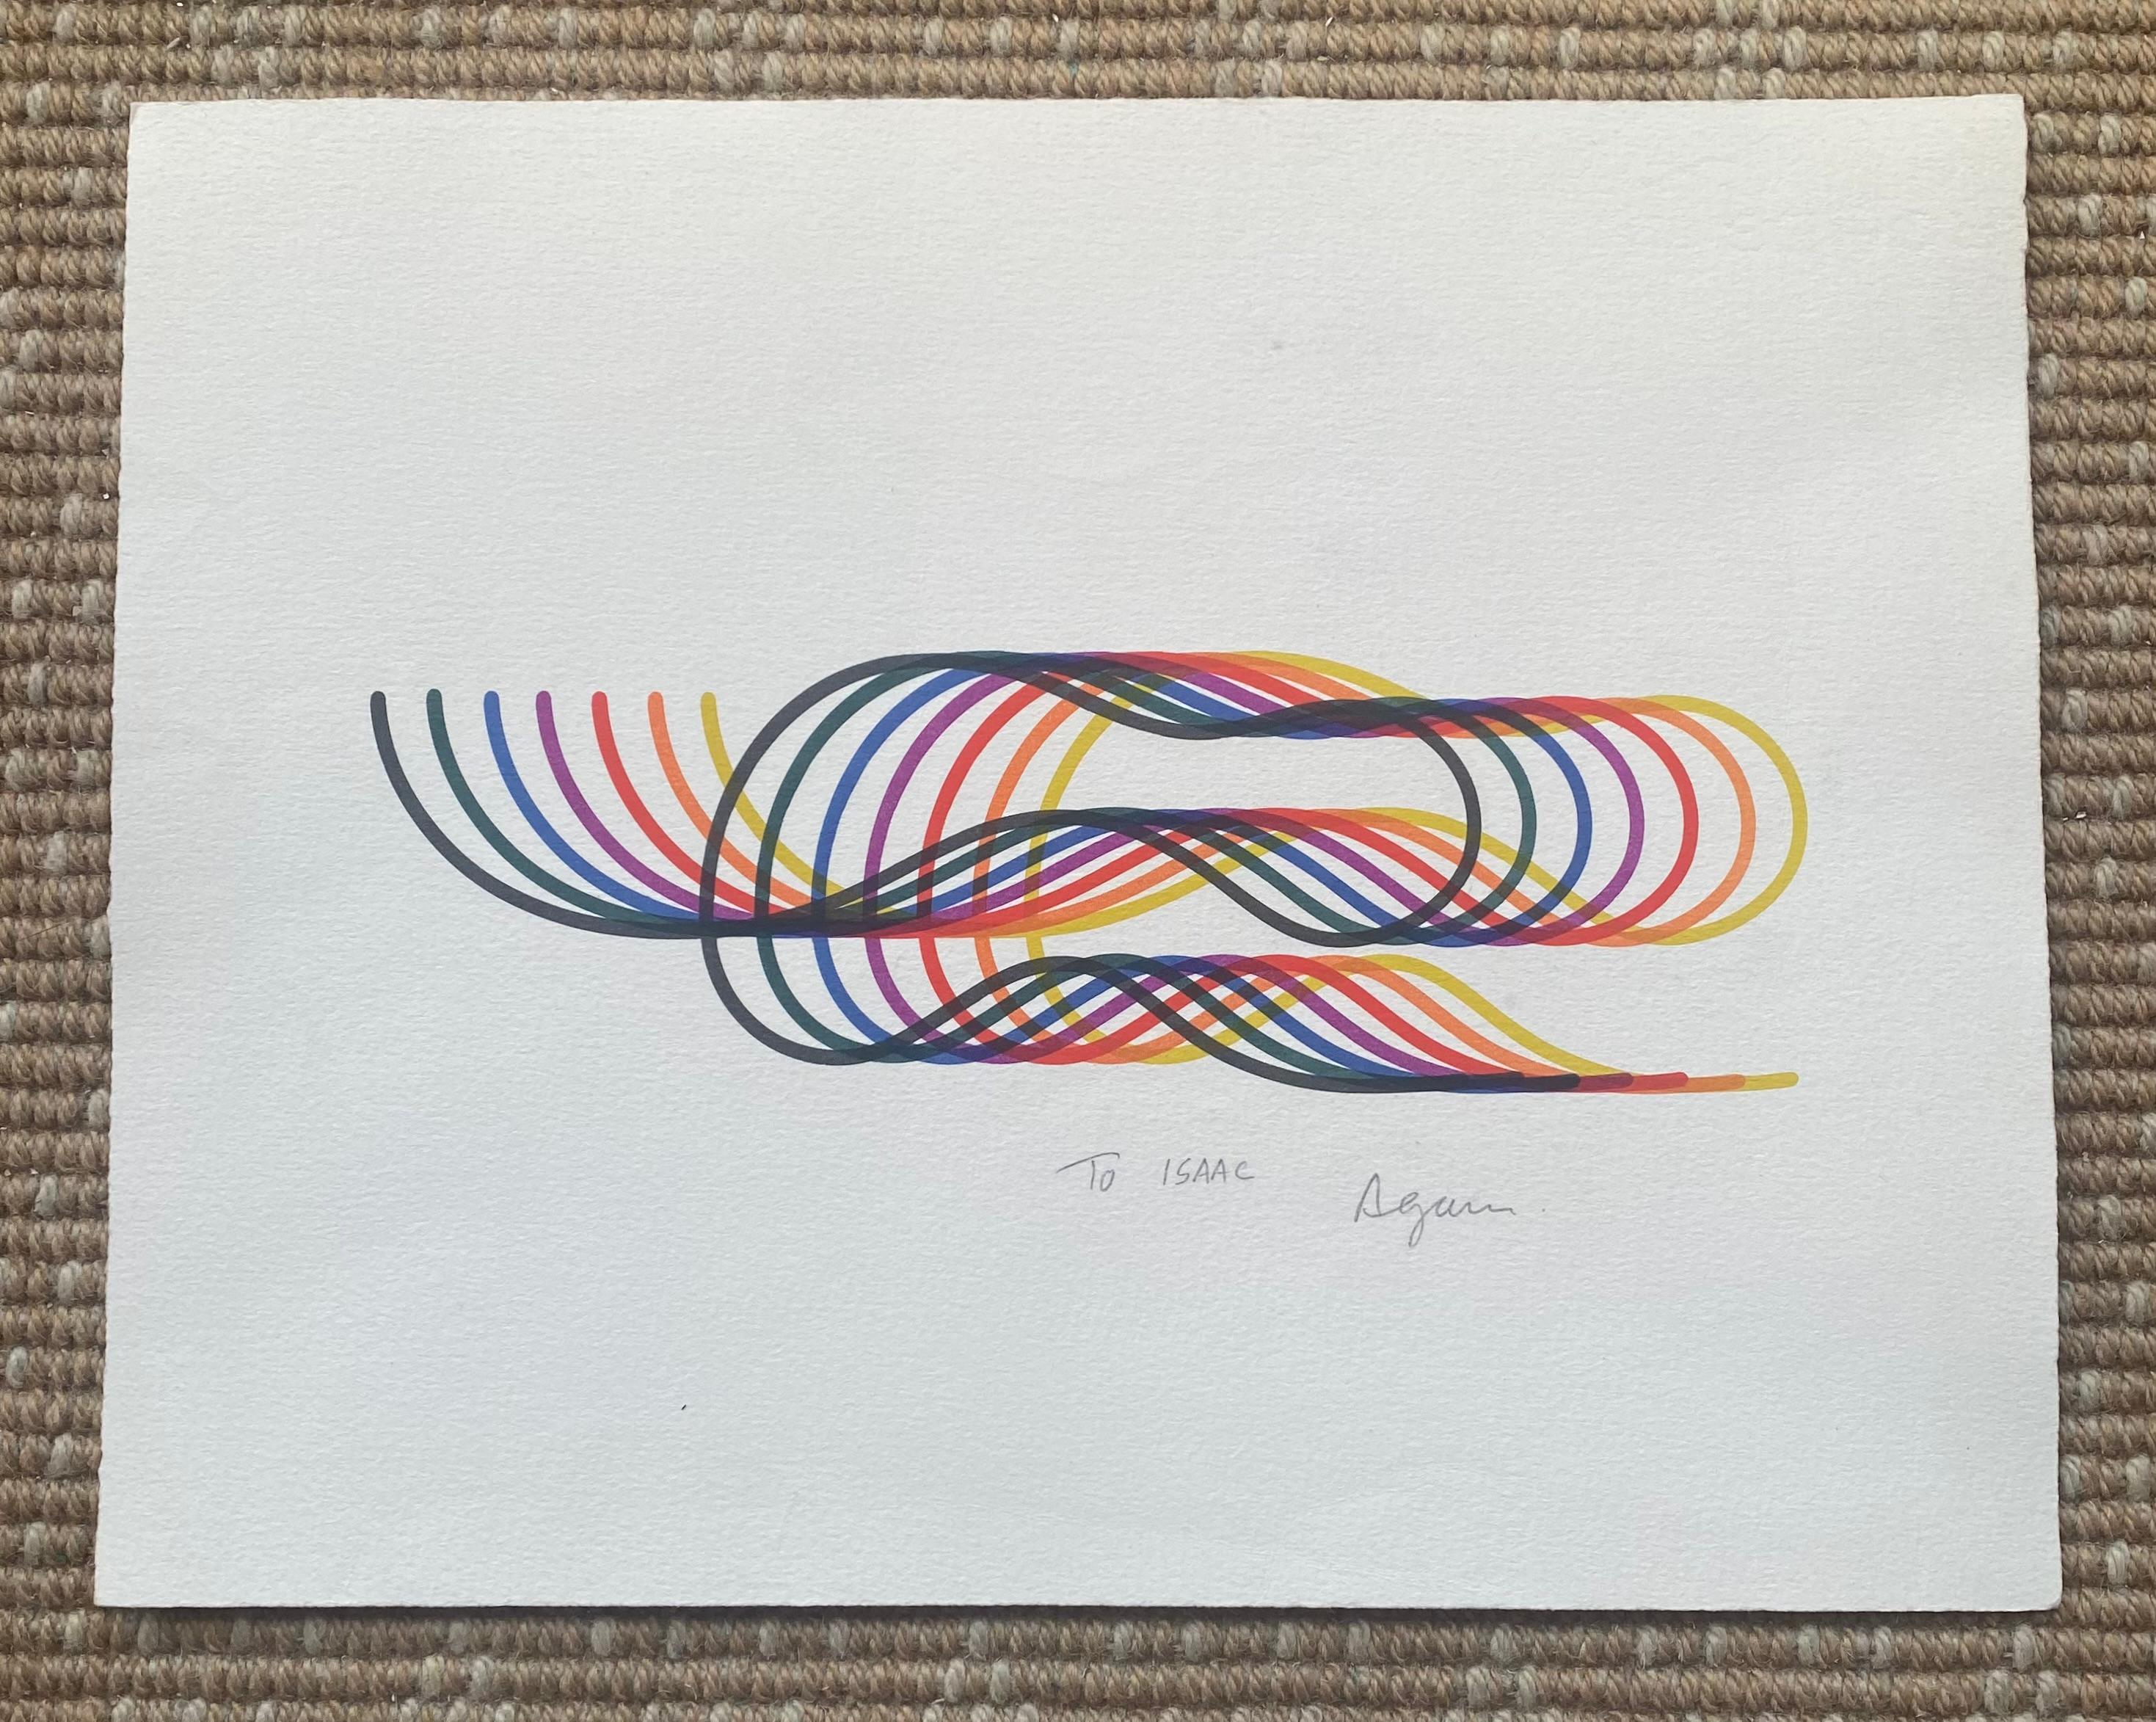 Paper Serigraph Dedicated to Isaac, Agam, 1975 For Sale